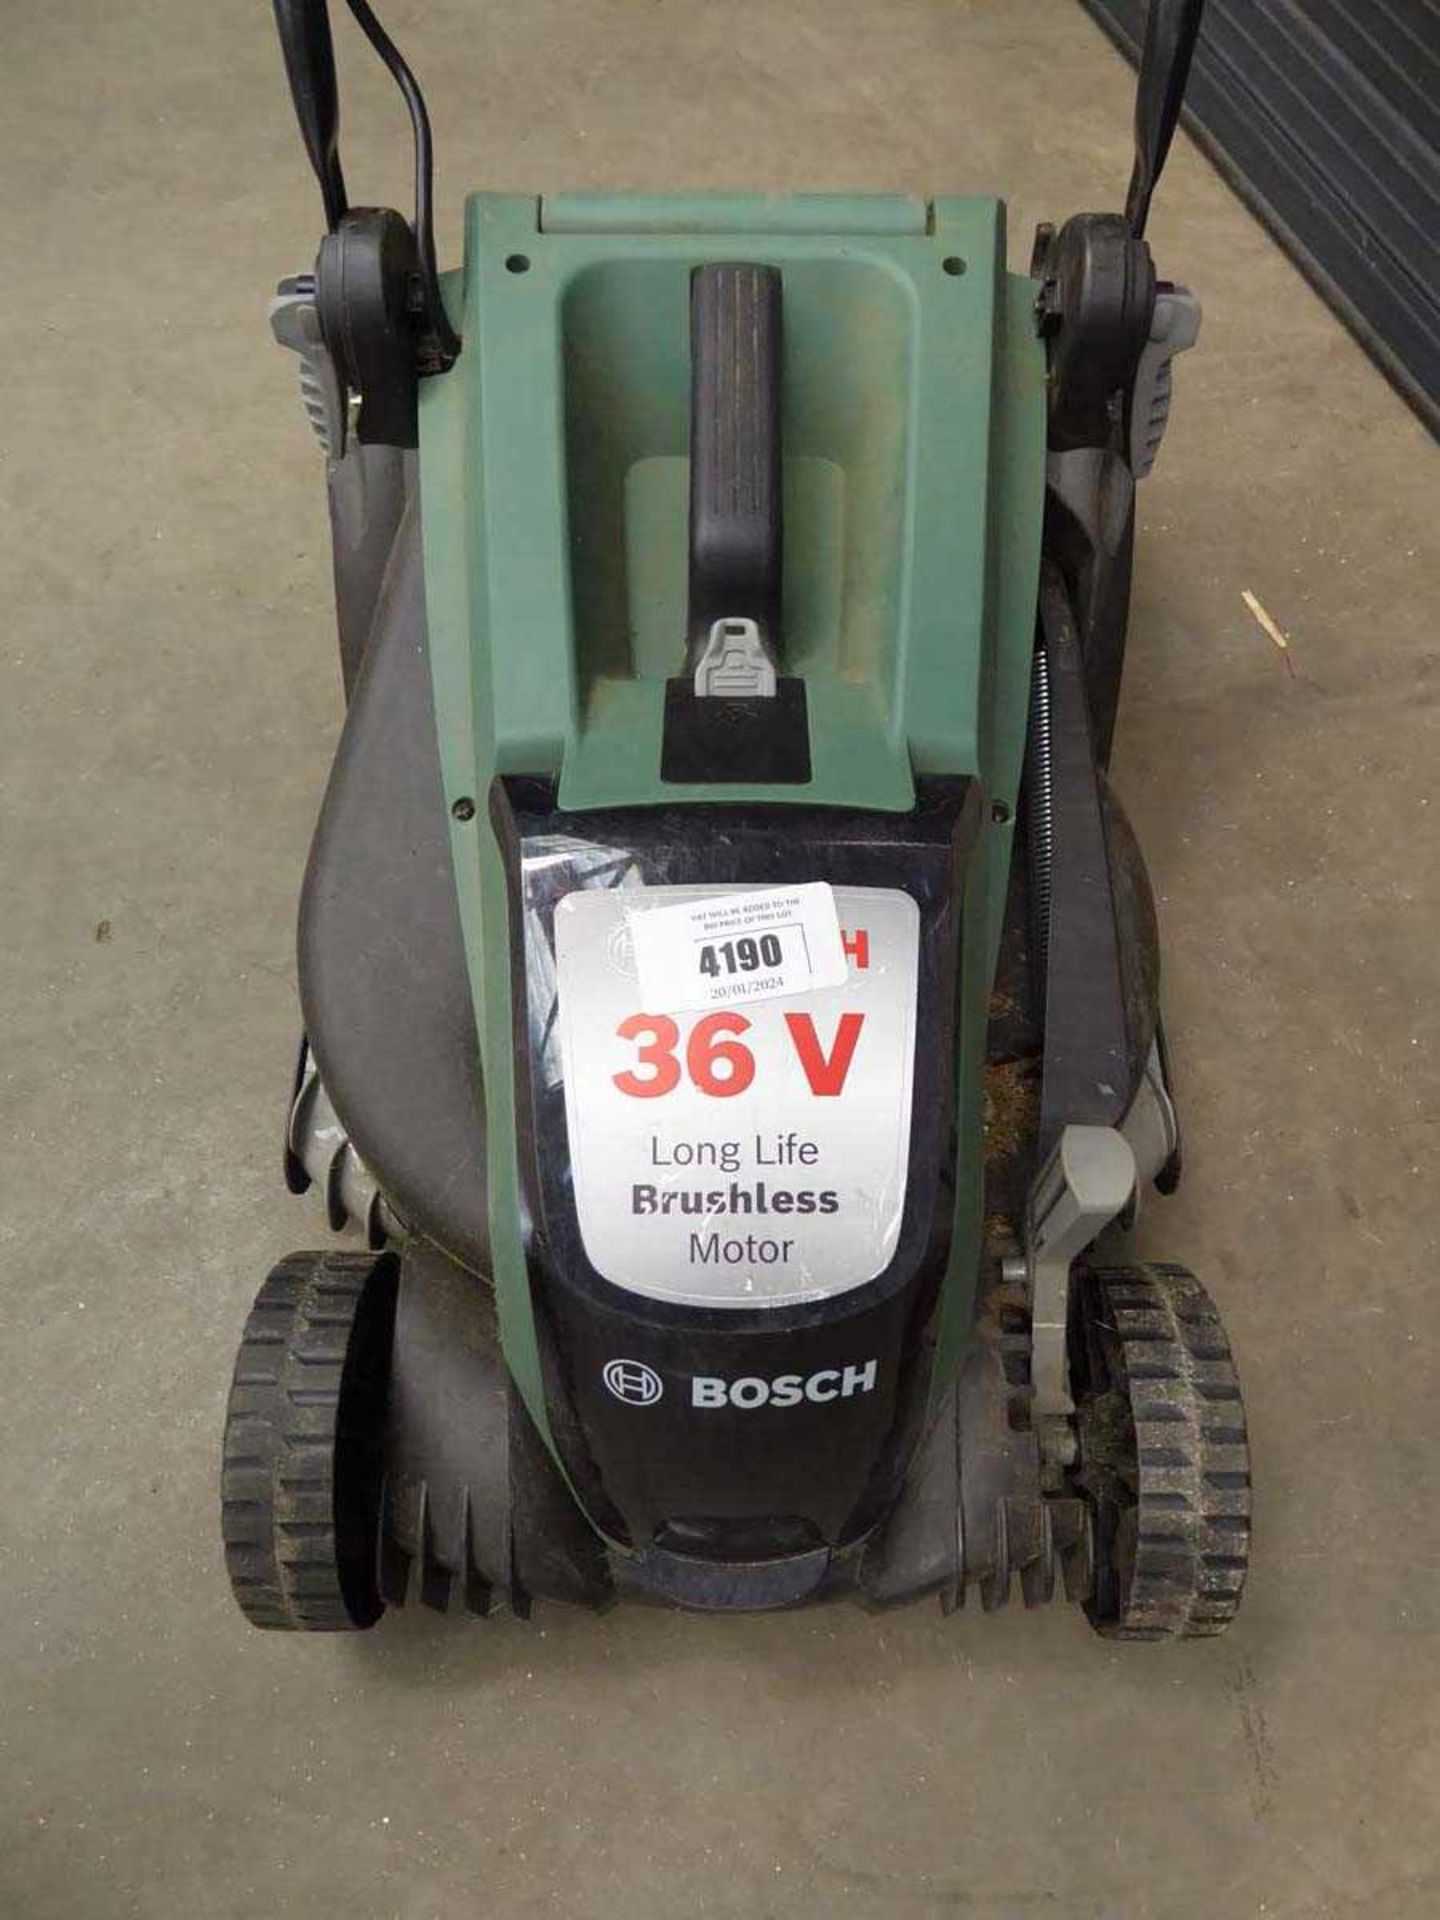 +VAT Bosch battery powered mower, no battery, charger, or grass box - Image 2 of 2